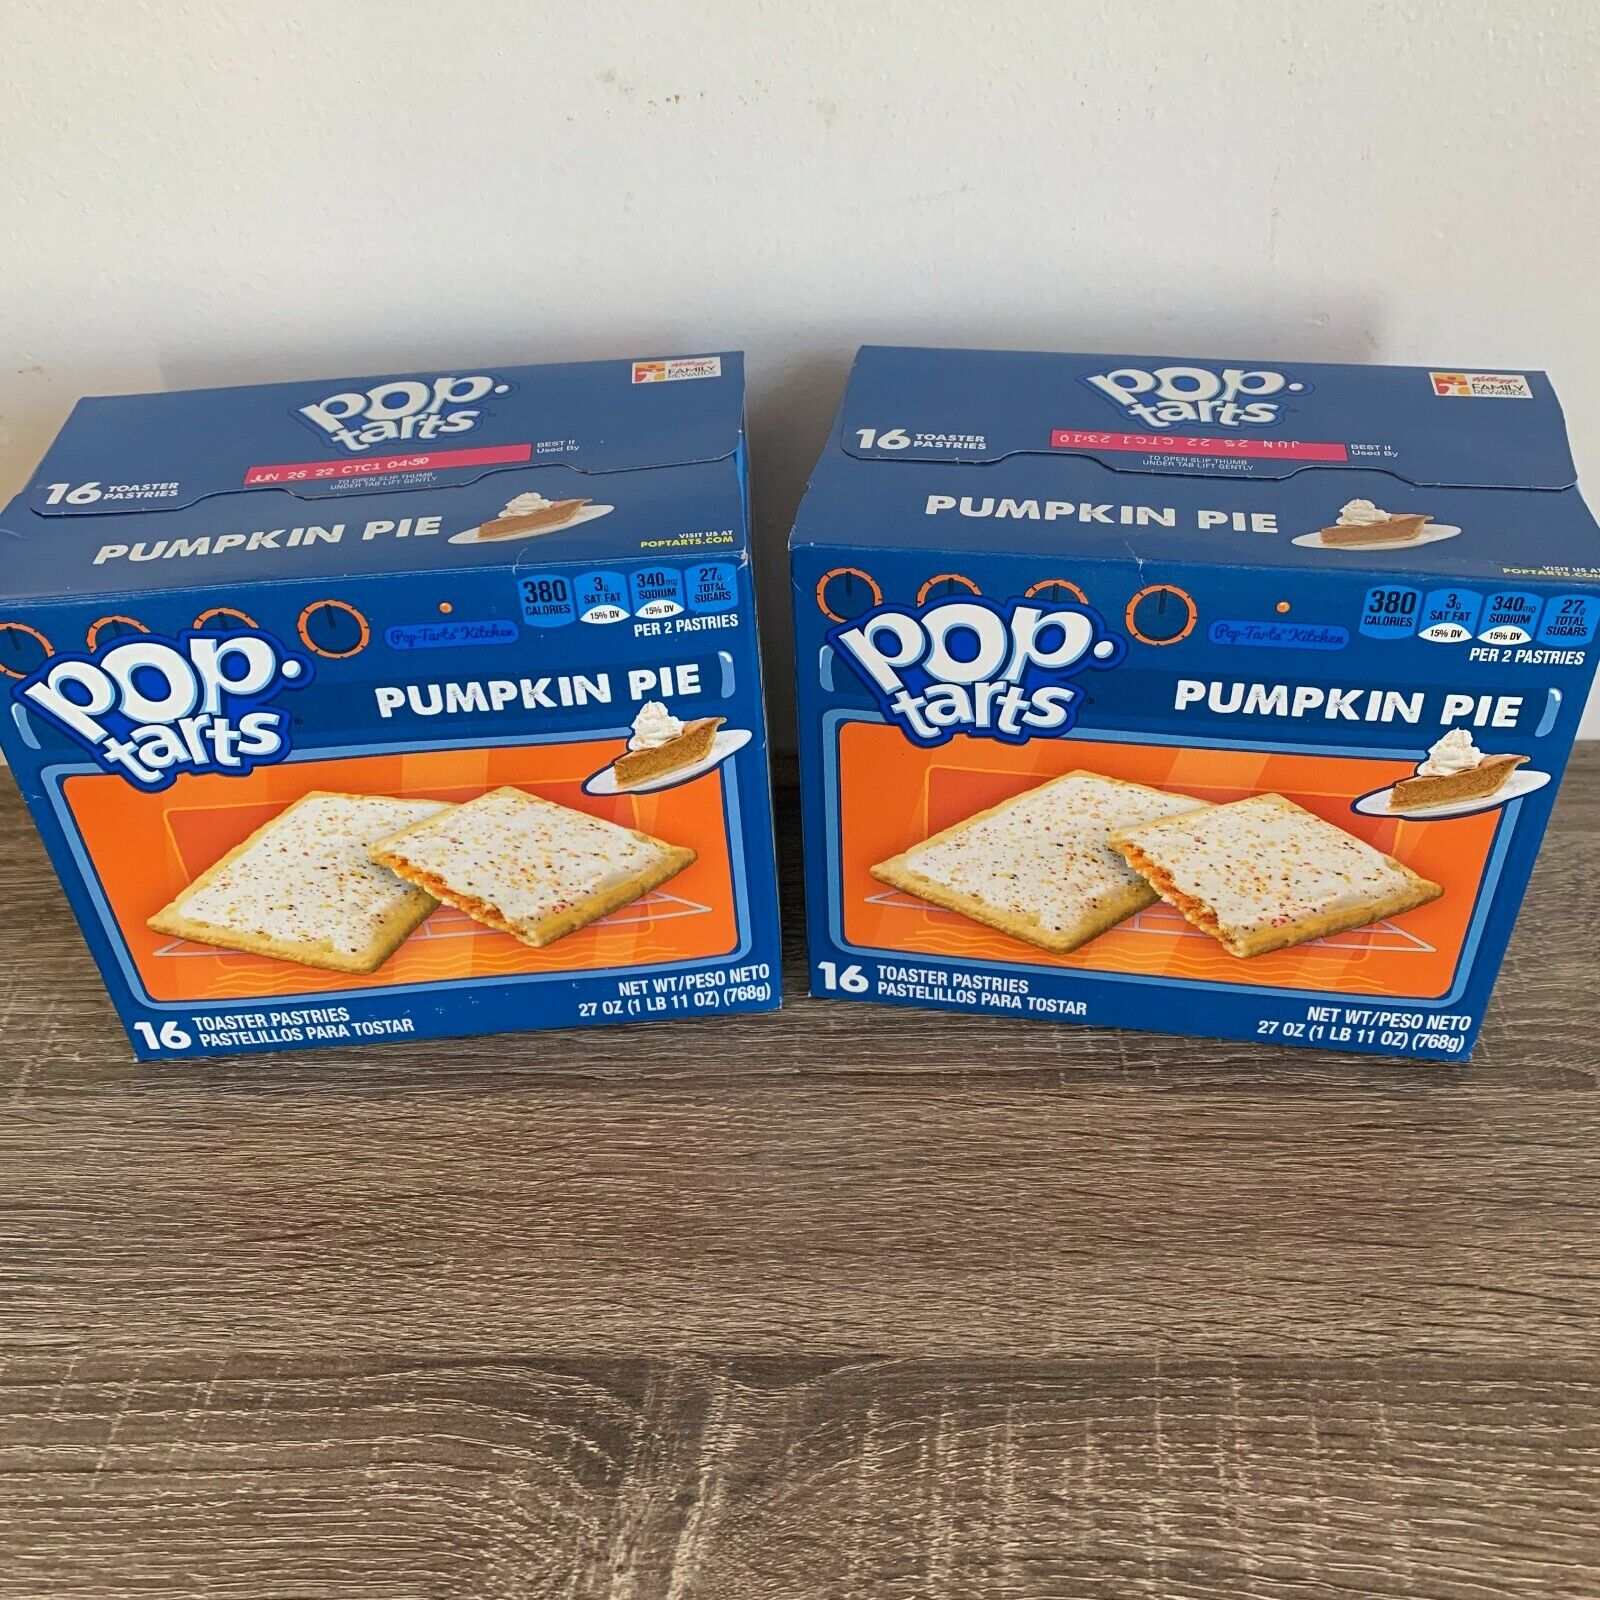 Pumpkin Pie Max 58% OFF Pop Tarts 2 Boxes Pastries Fal Each 16 Lowest price challenge Toaster Count